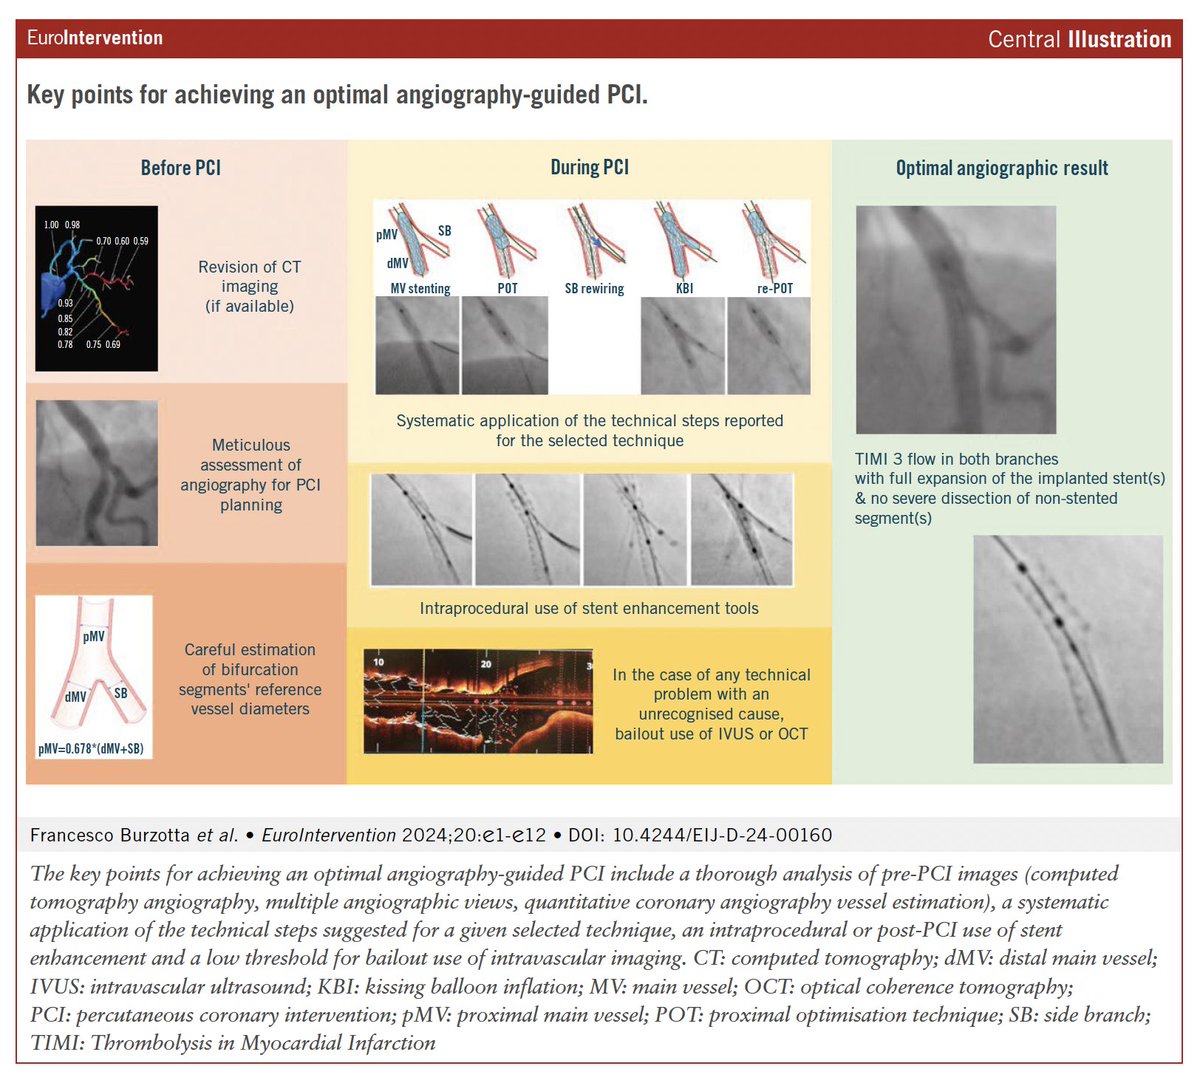 In the 18th Expert Consensus Document, now available in the Journal, the European Bifurcation Club (EBC) reviews and describes a series of tips and tricks which can help to optimize angiography-guided PCI for coronary bifurcation lesions. These include: - A thorough analysis